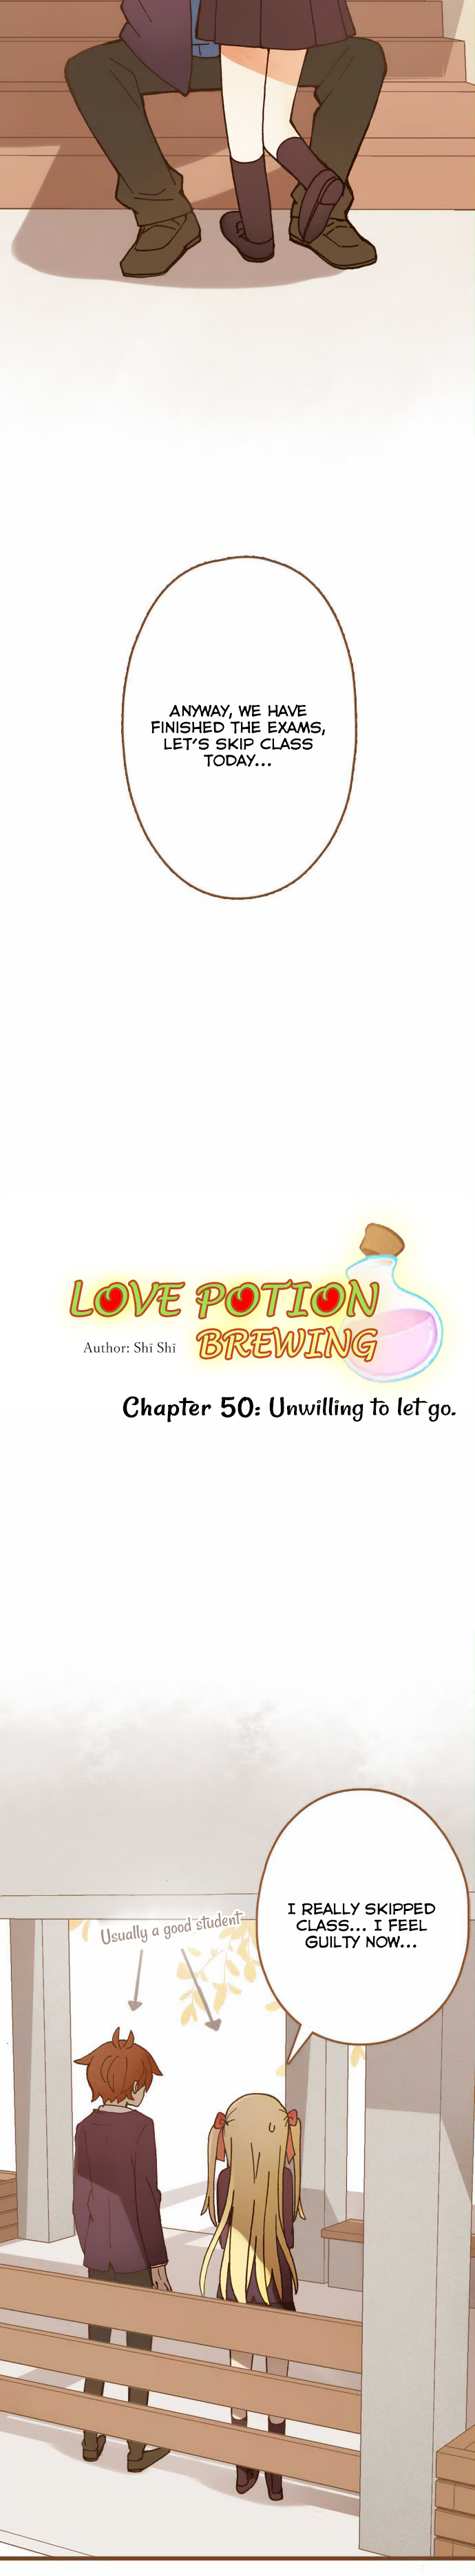 Love Potion Brewing Chapter 50 #5